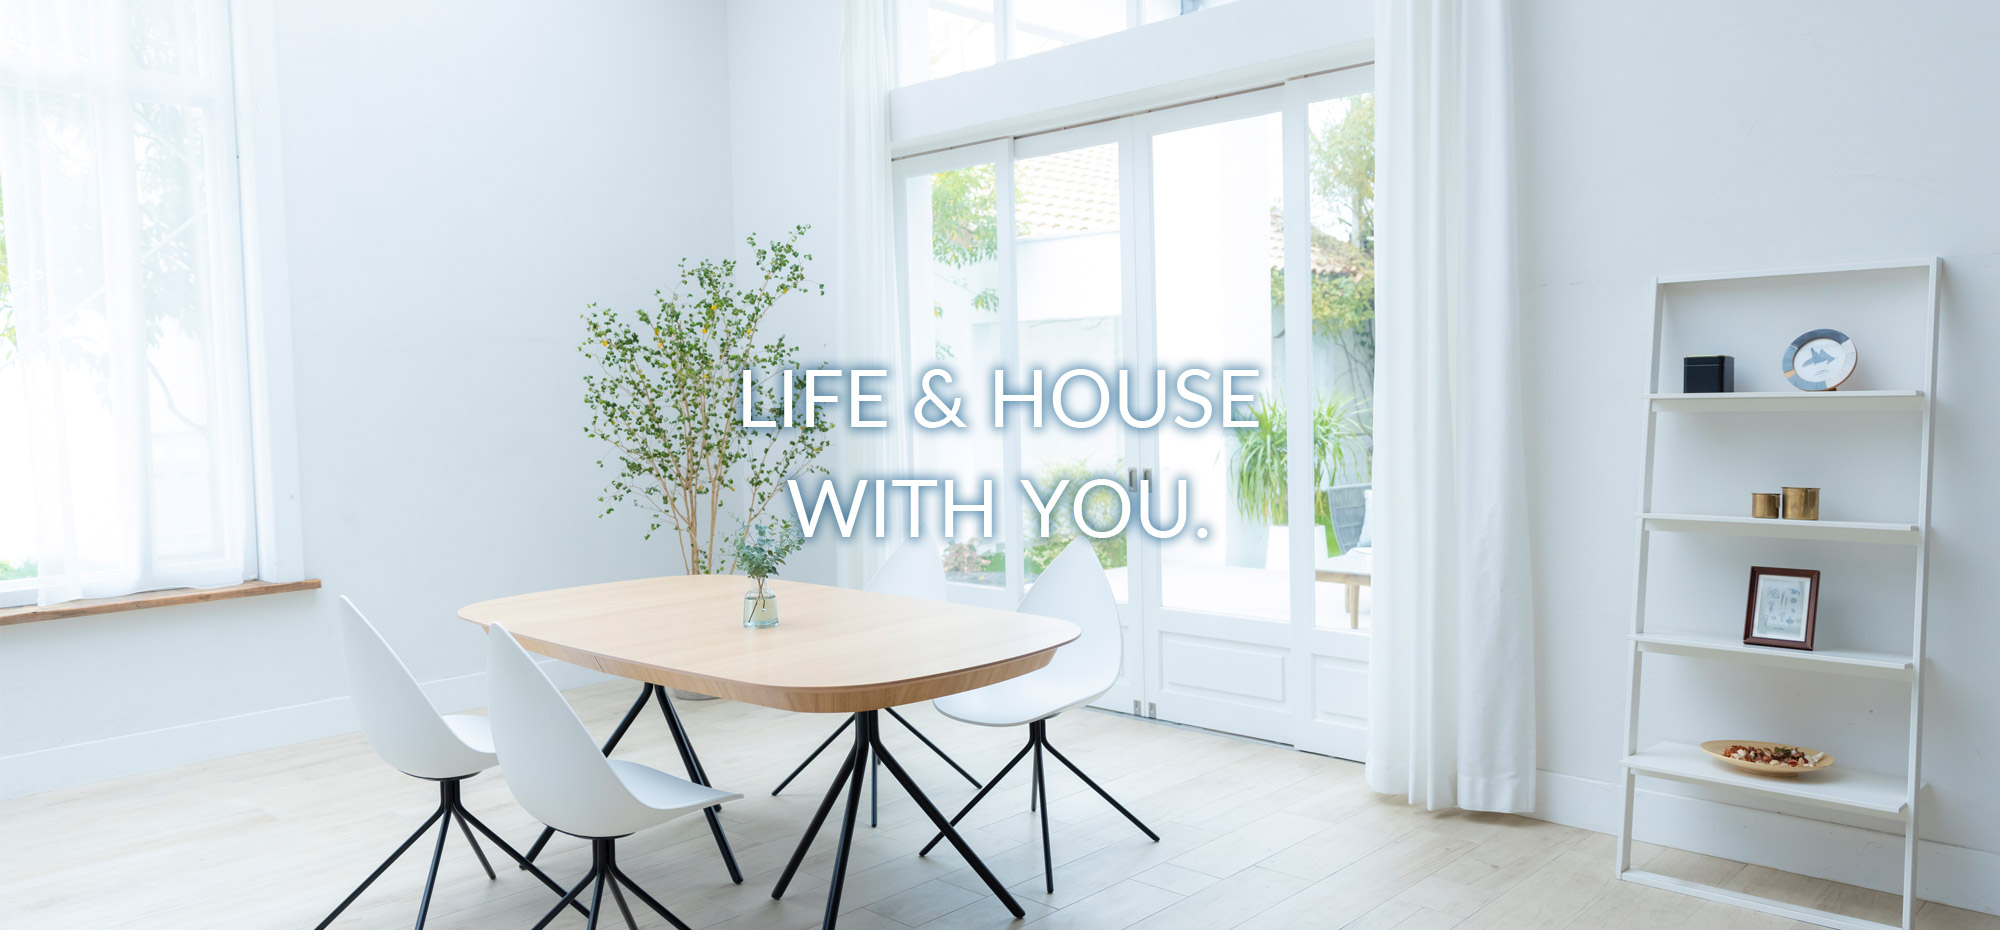 LIFE&HOUSE WITH YOU.